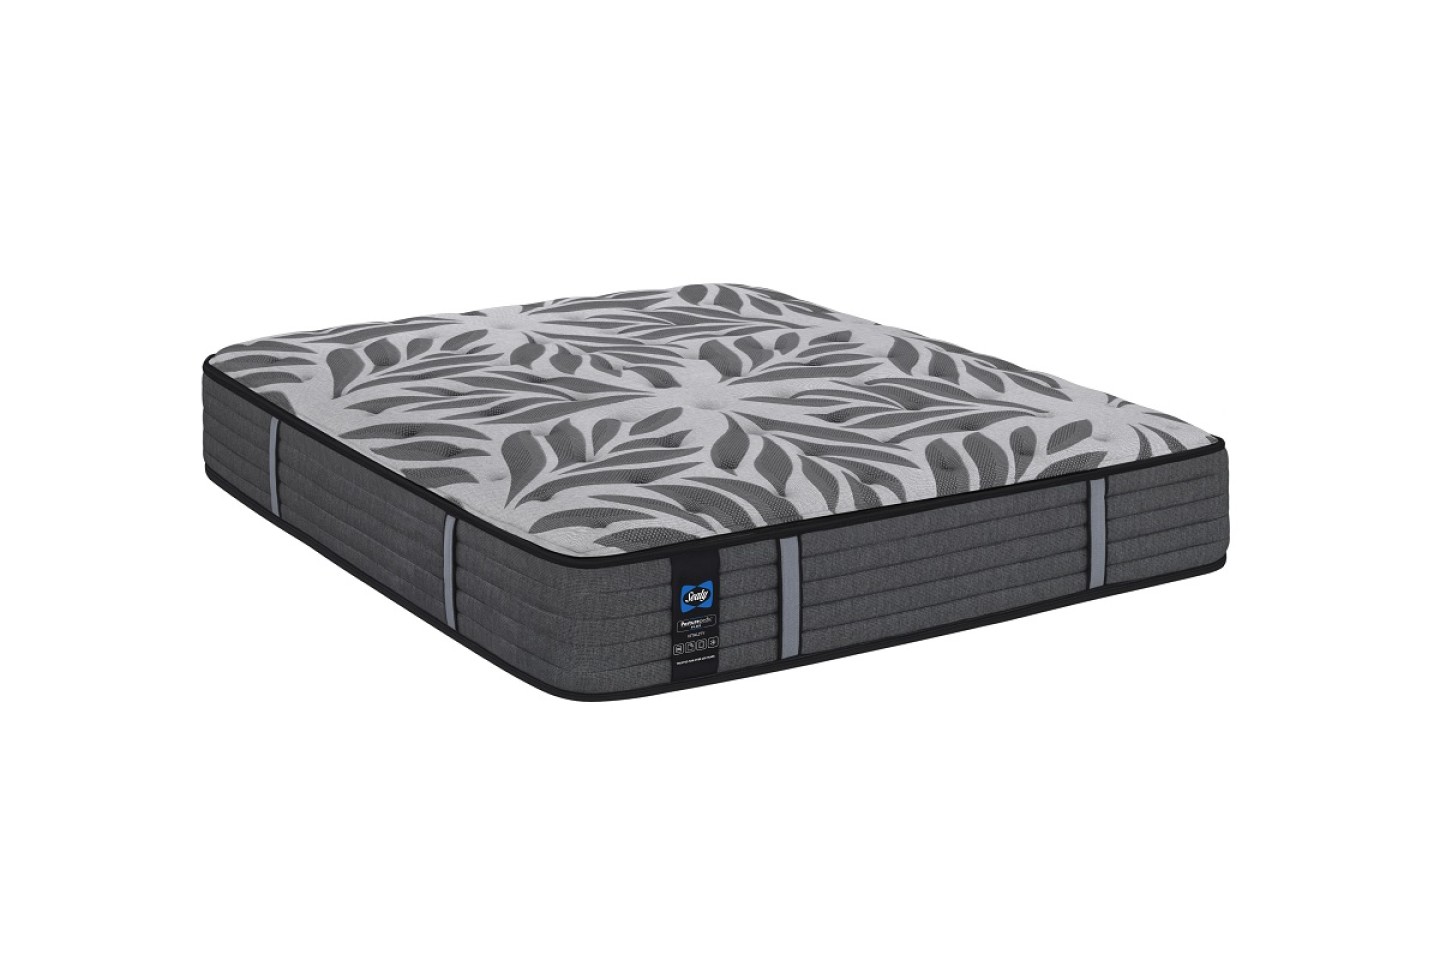 THE VITALITY MATTRESS by Sealy